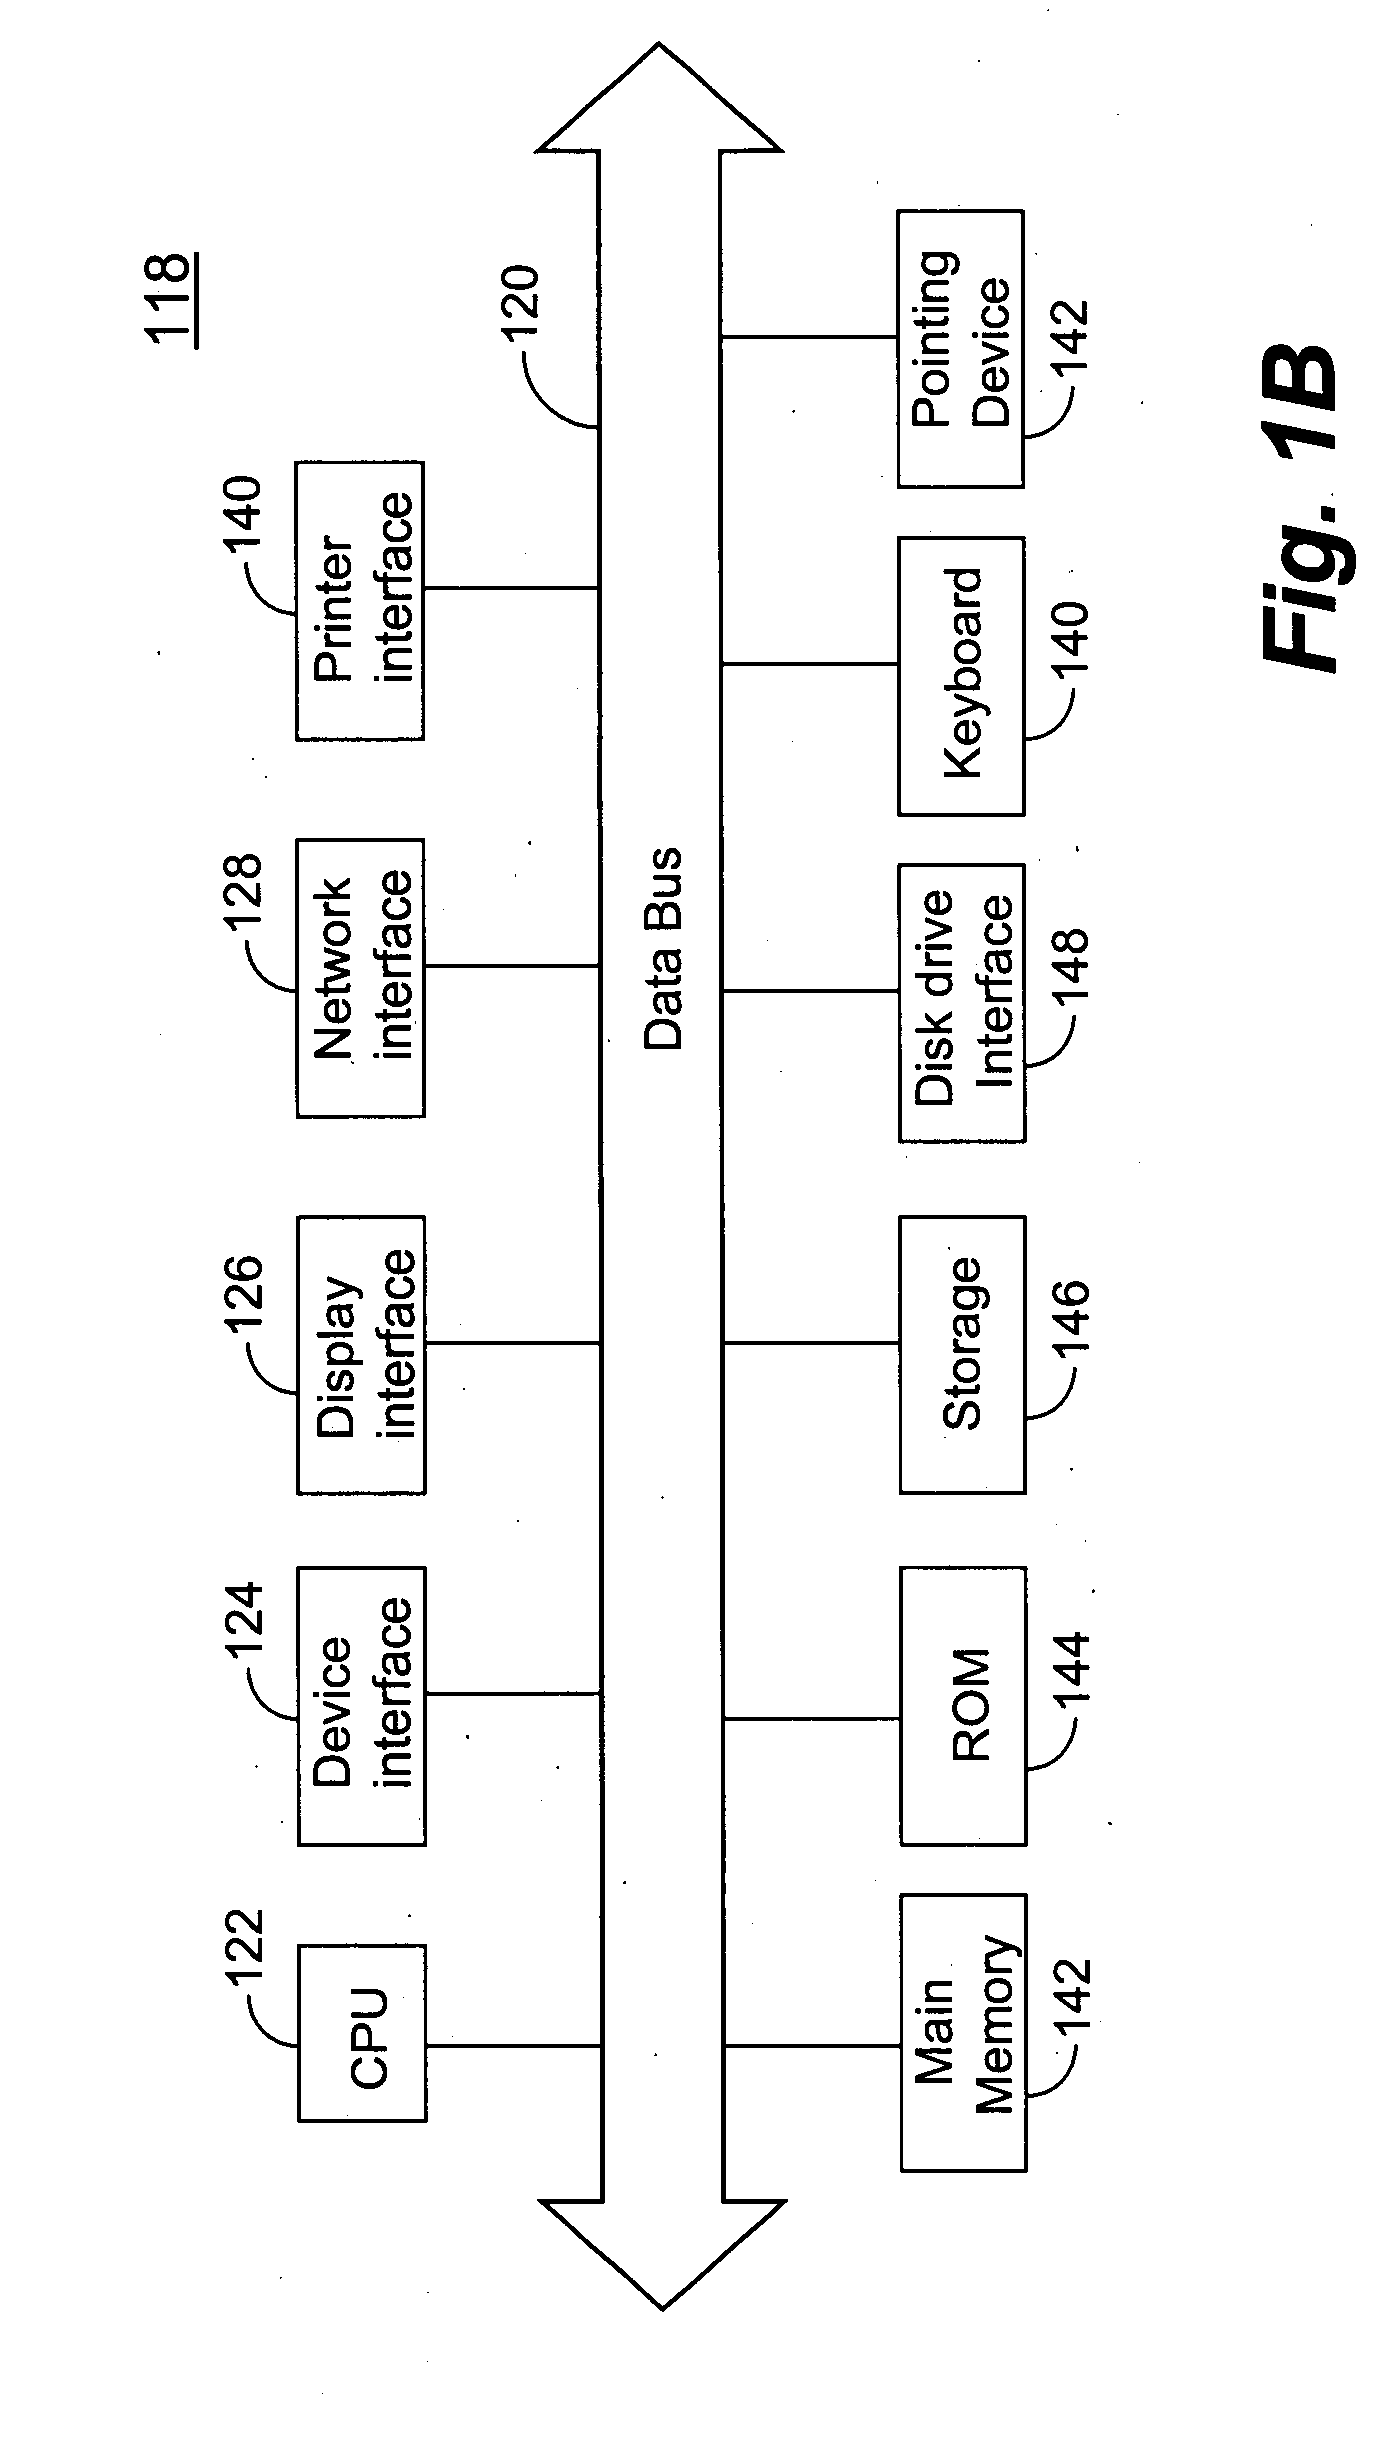 Method and system for dynamically modeling resources